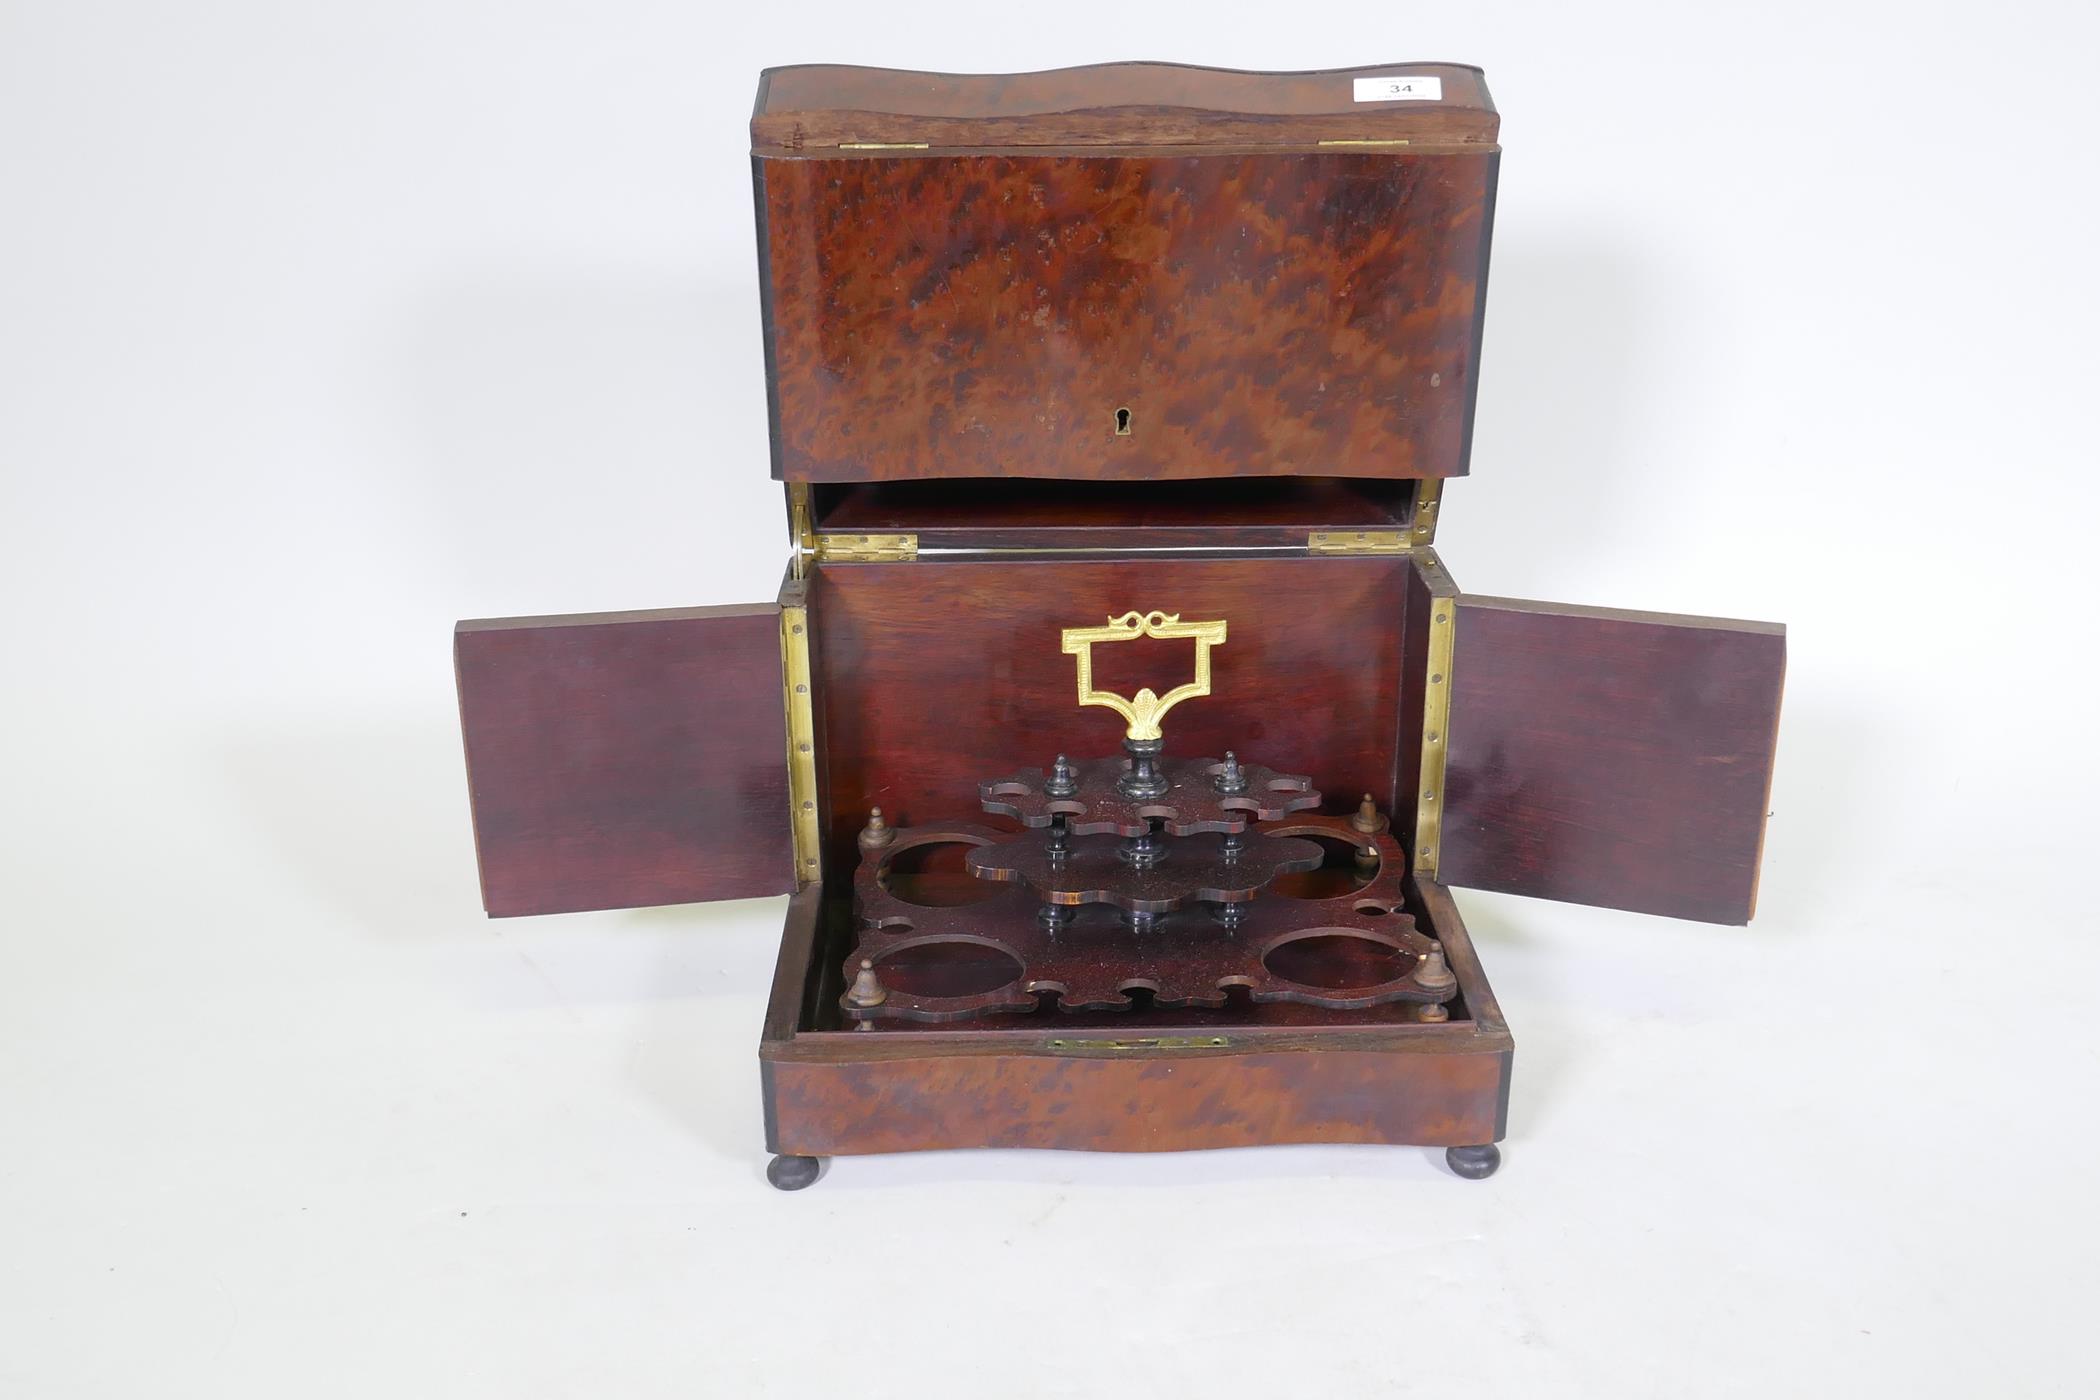 A C19th amboyna and ebony serpentine front decanter case, the lift up top and fold out sides opening - Image 2 of 5